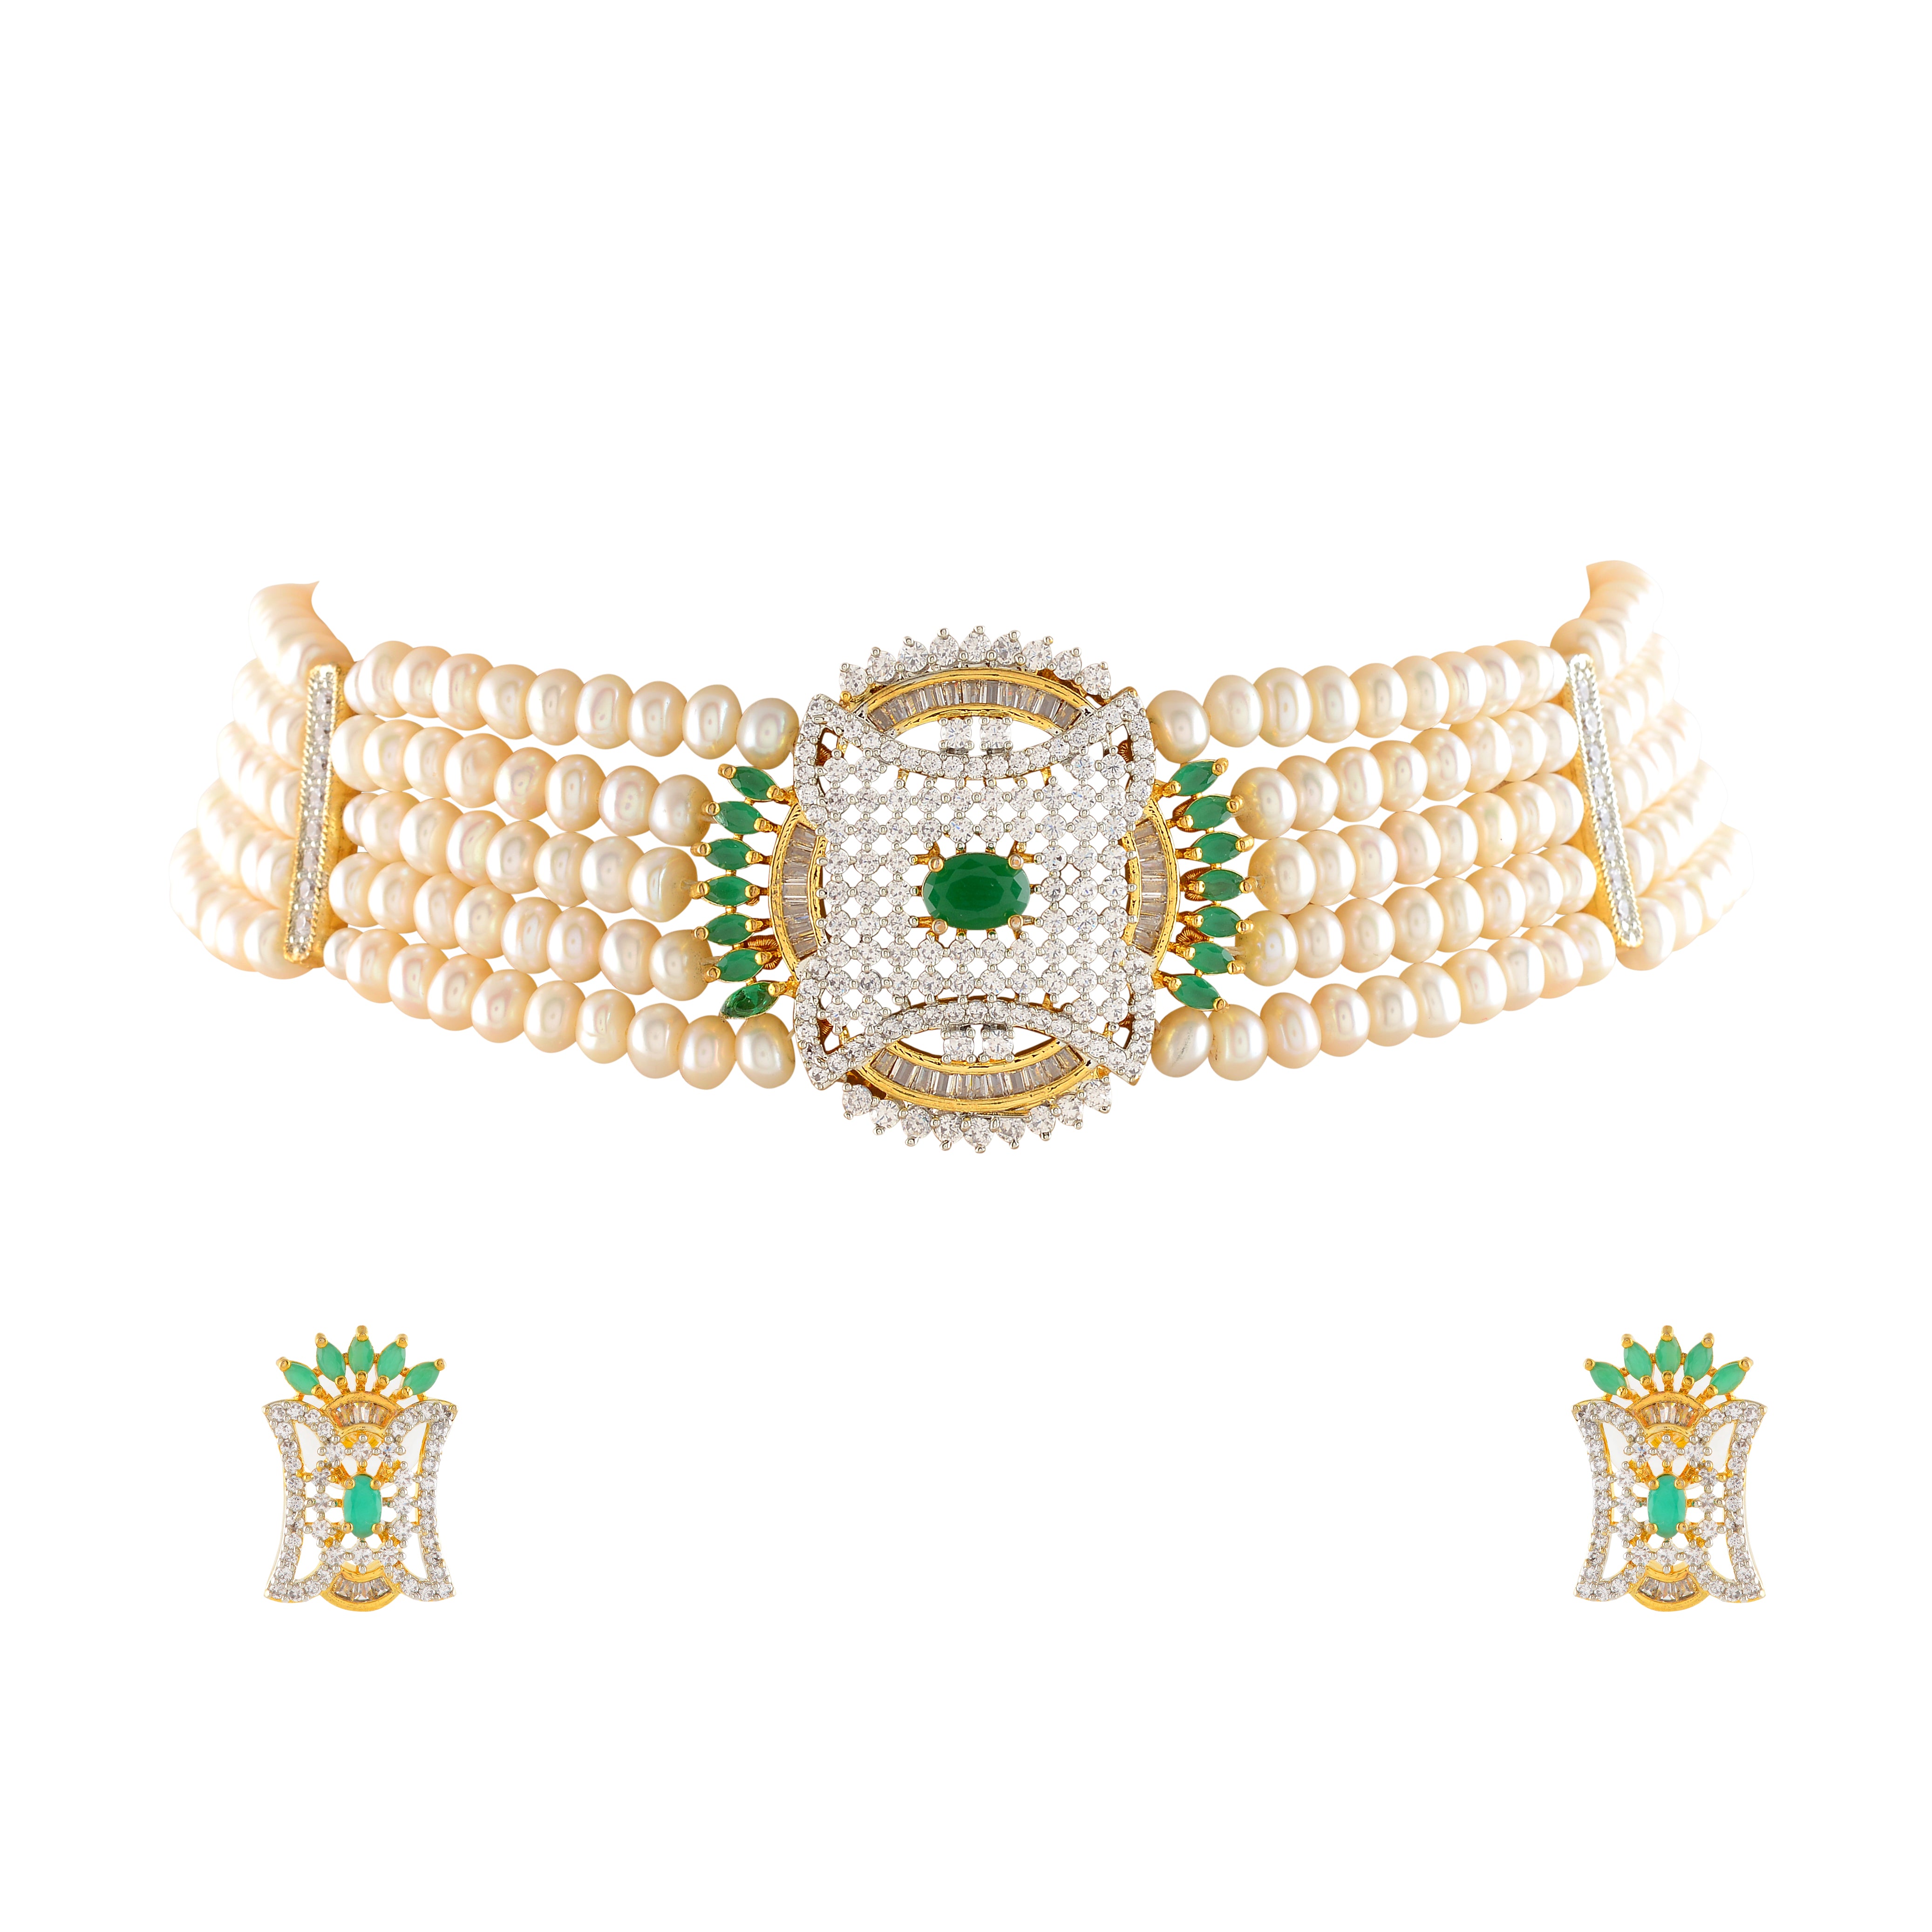 Exquisite Natural Pearl Choker Set with Emeralds and CZ Stones - Krishna Jewellers Pearls and Gems